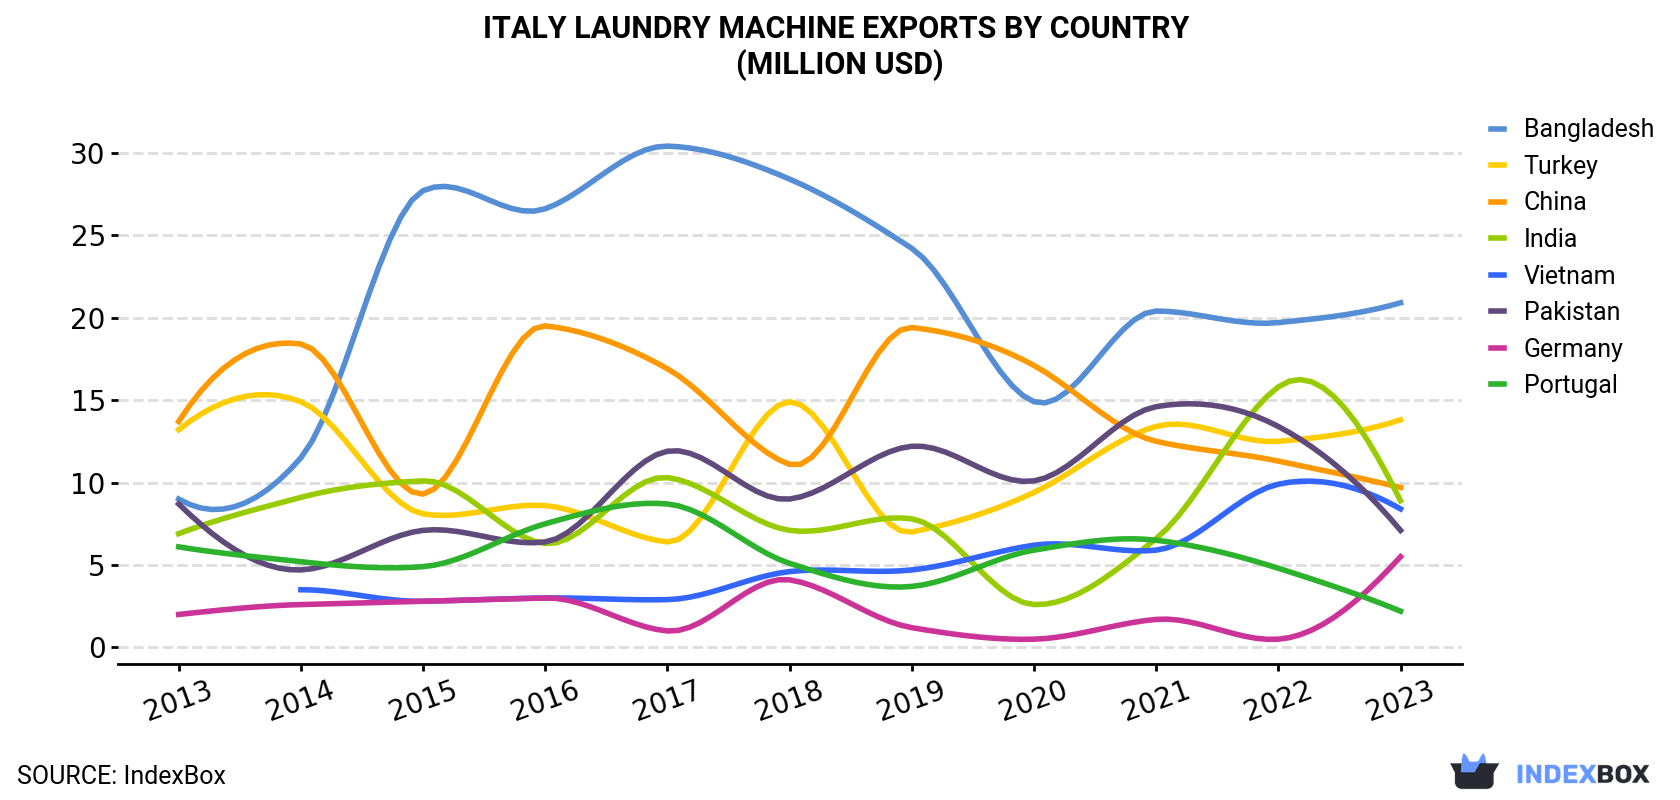 Italy Laundry Machine Exports By Country (Million USD)